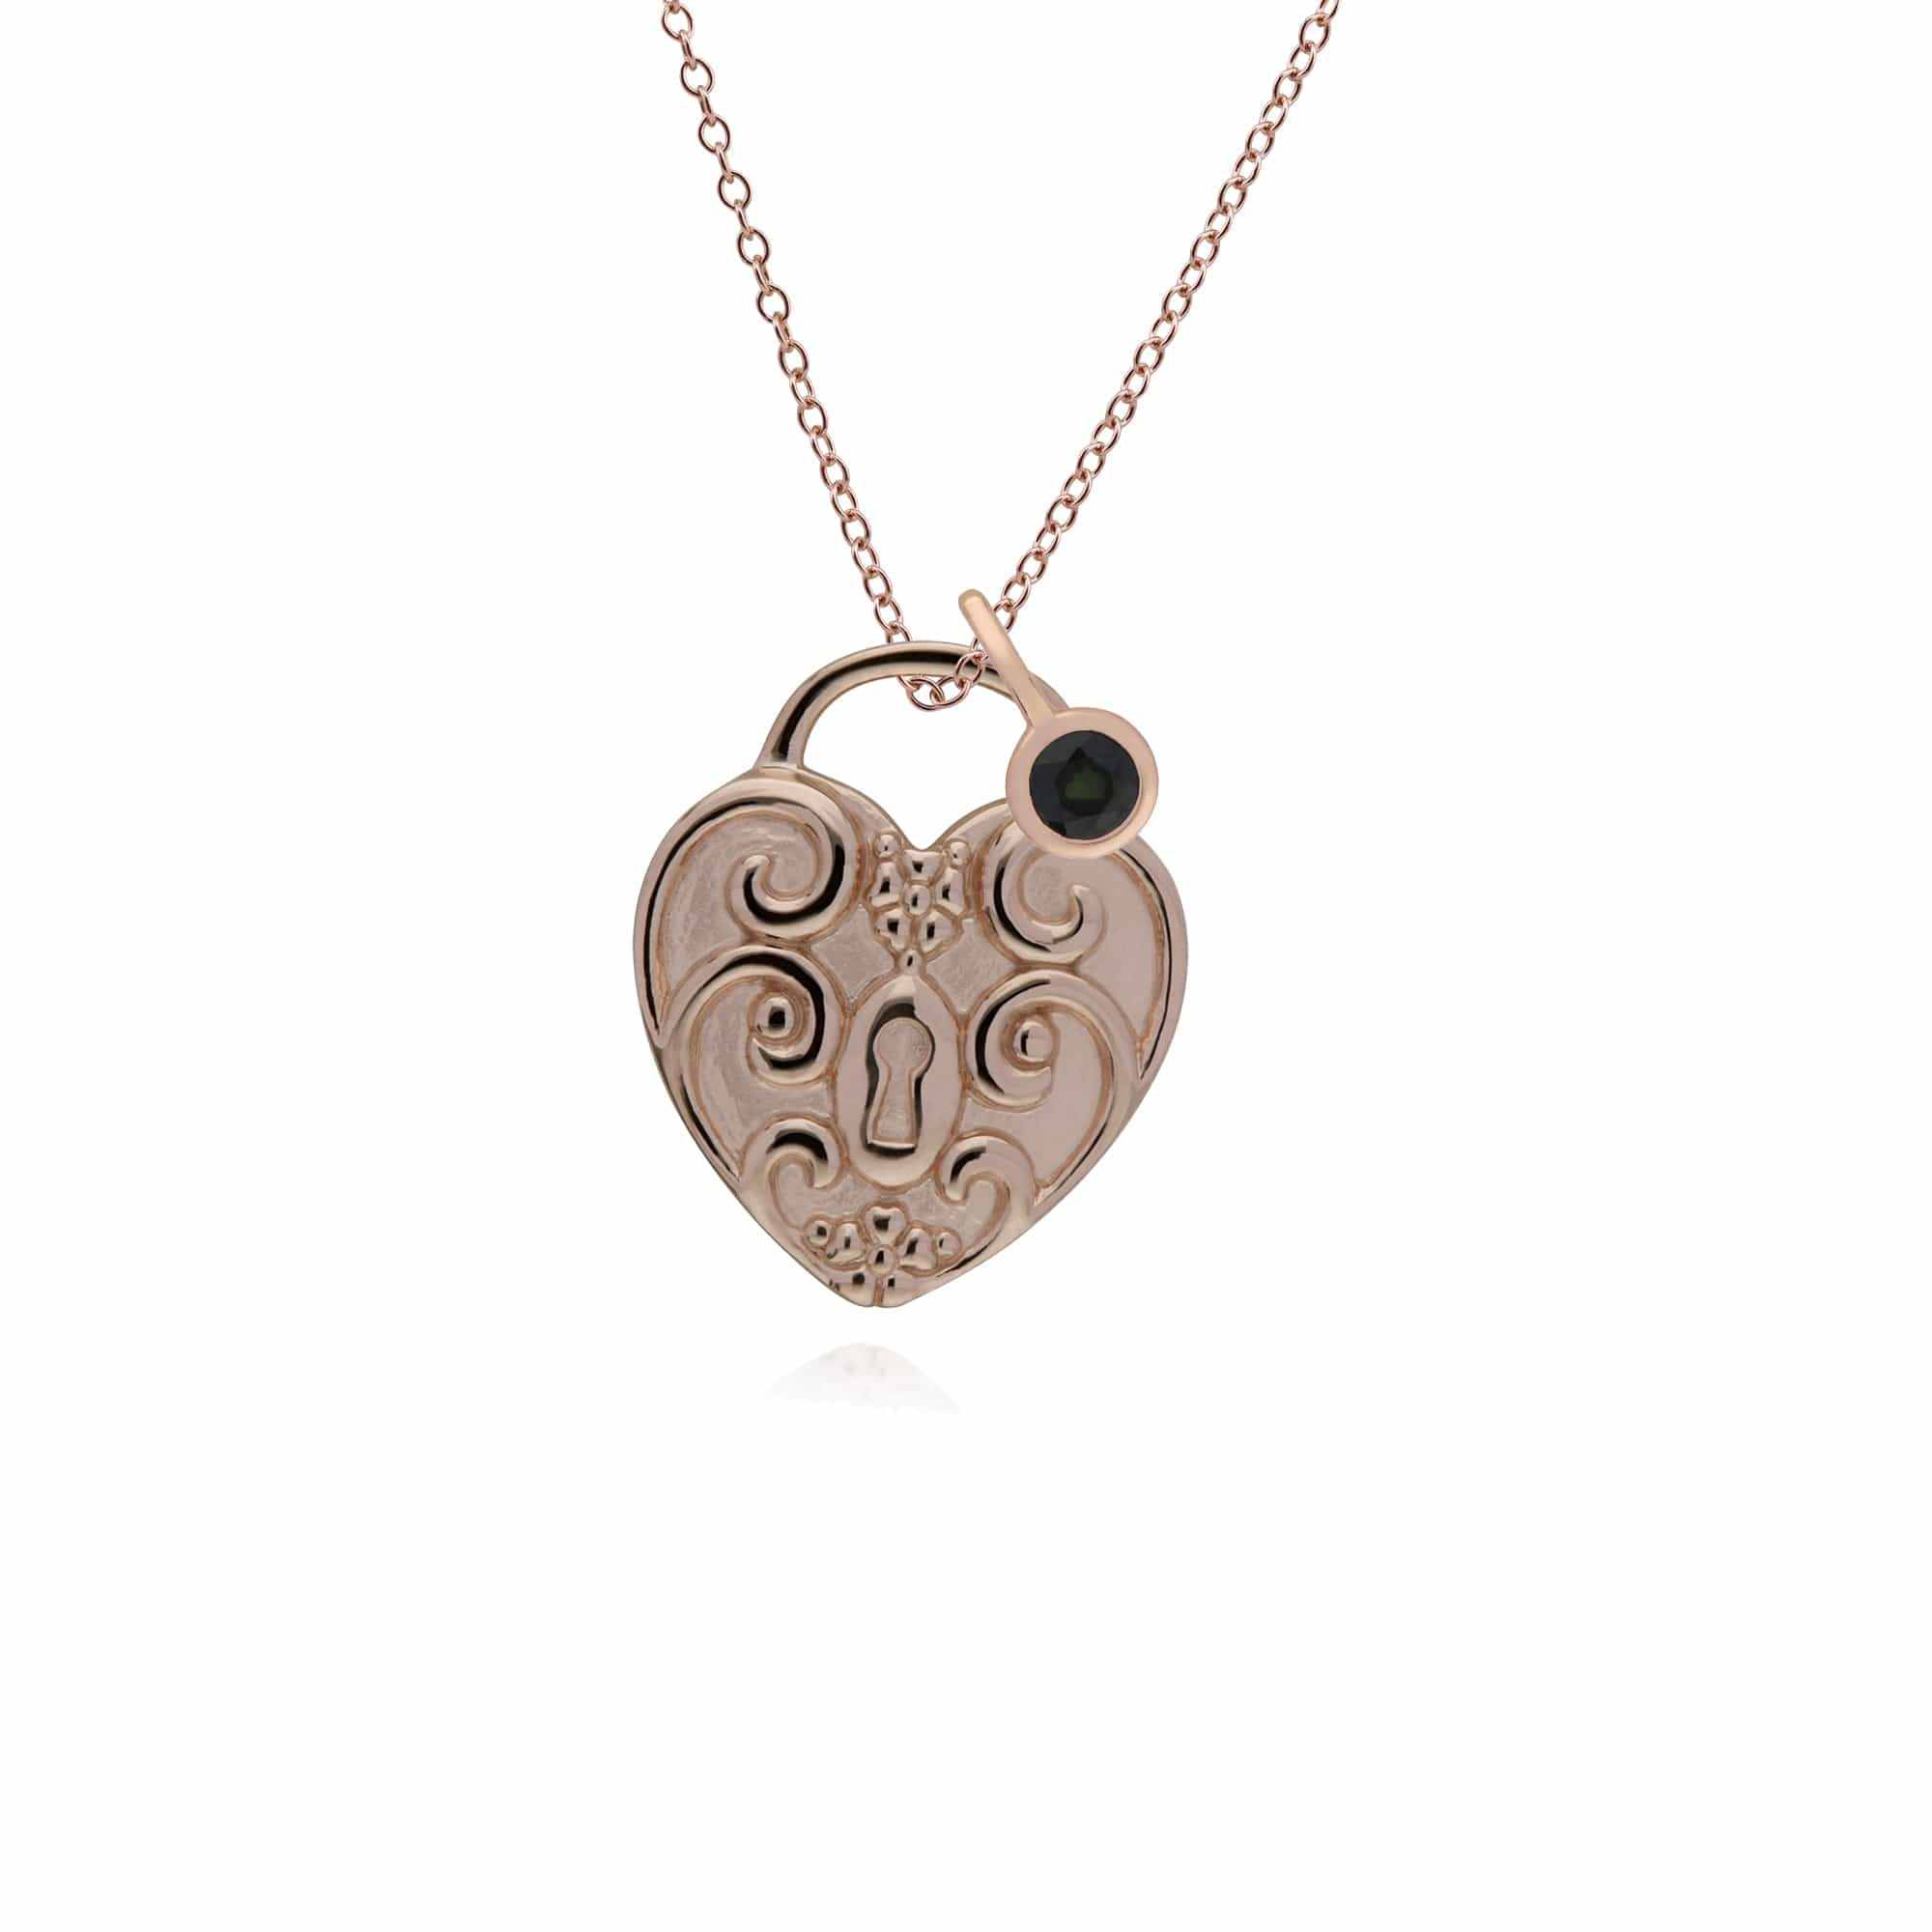 270P027310925-270P026501925 Classic Swirl Heart Lock Pendant & Sapphire Charm in Rose Gold Plated 925 Sterling Silver 1